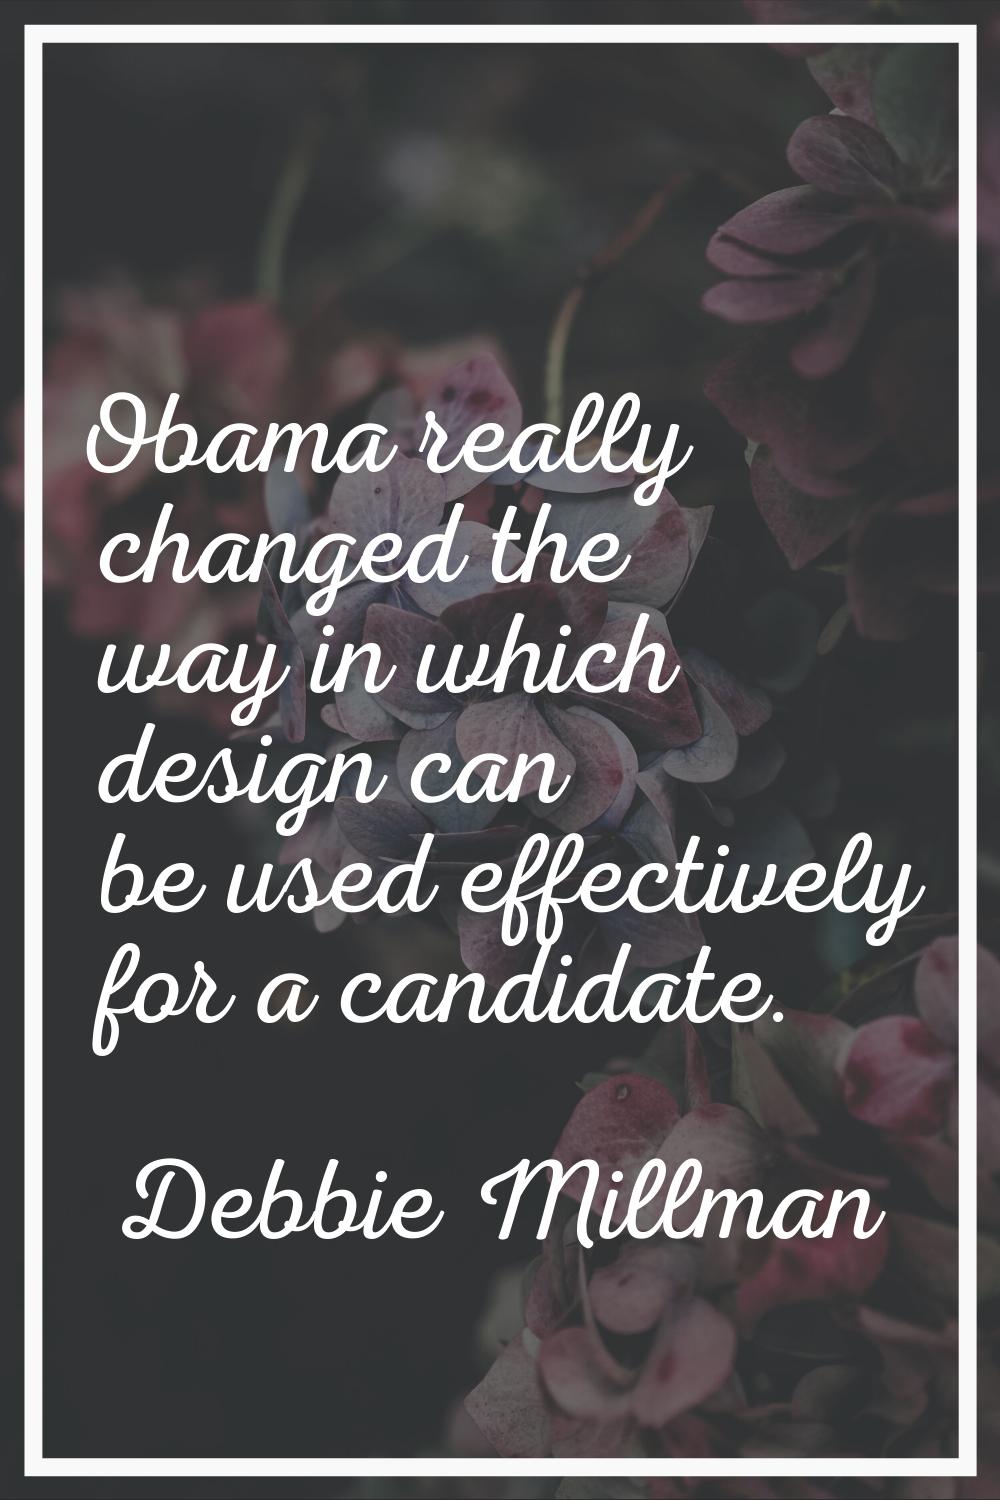 Obama really changed the way in which design can be used effectively for a candidate.